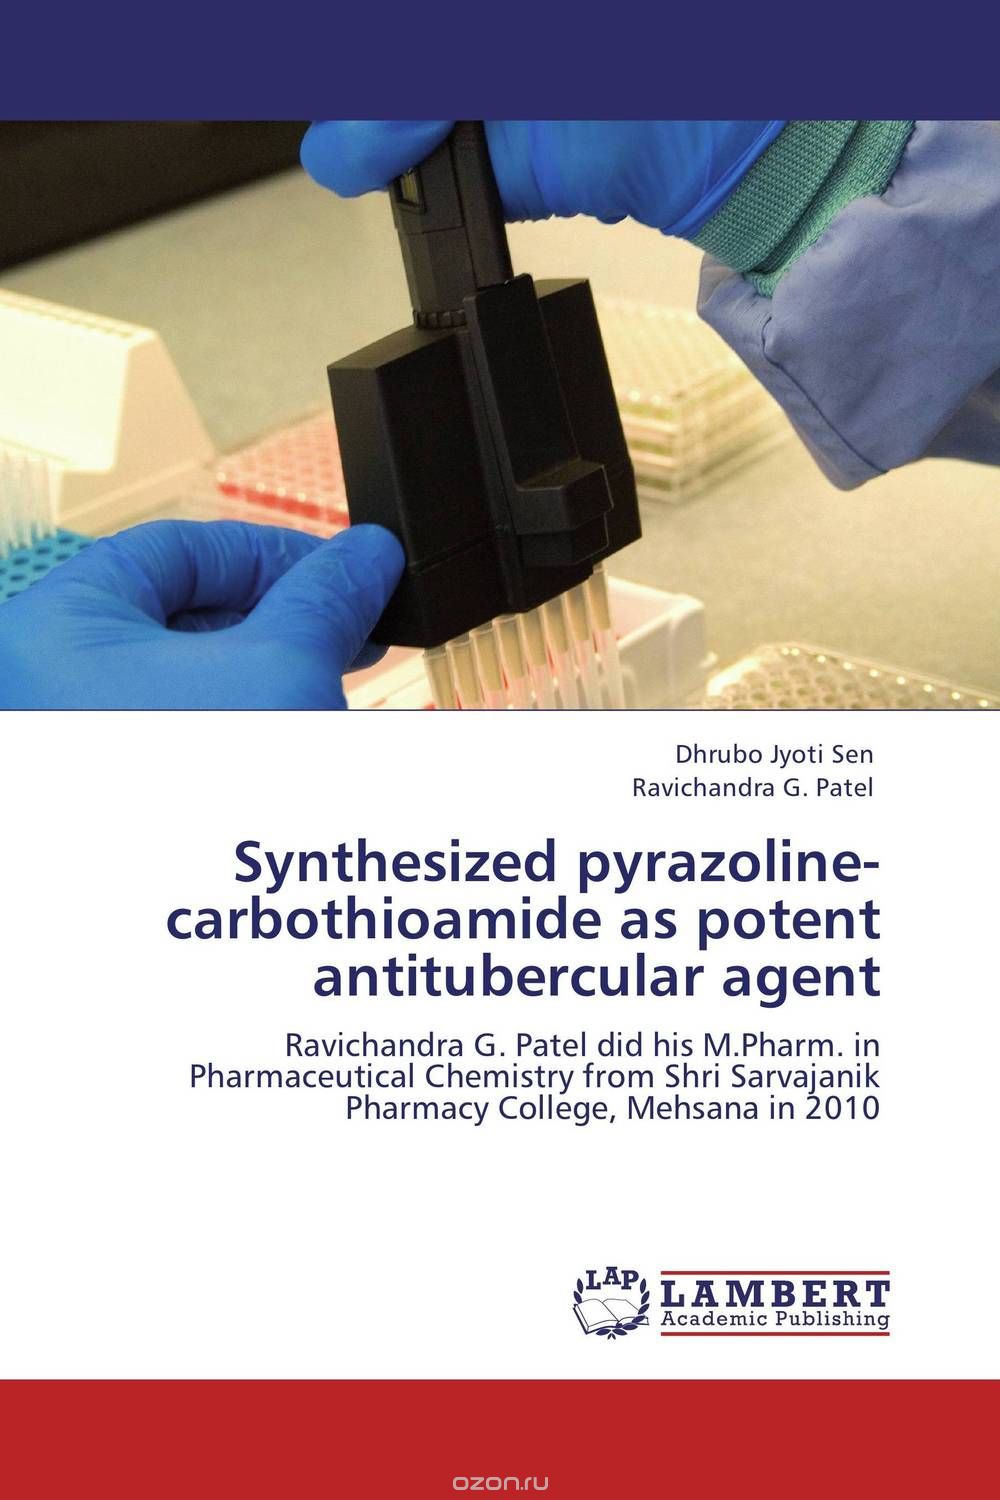 Synthesized pyrazoline-carbothioamide as potent antitubercular agent